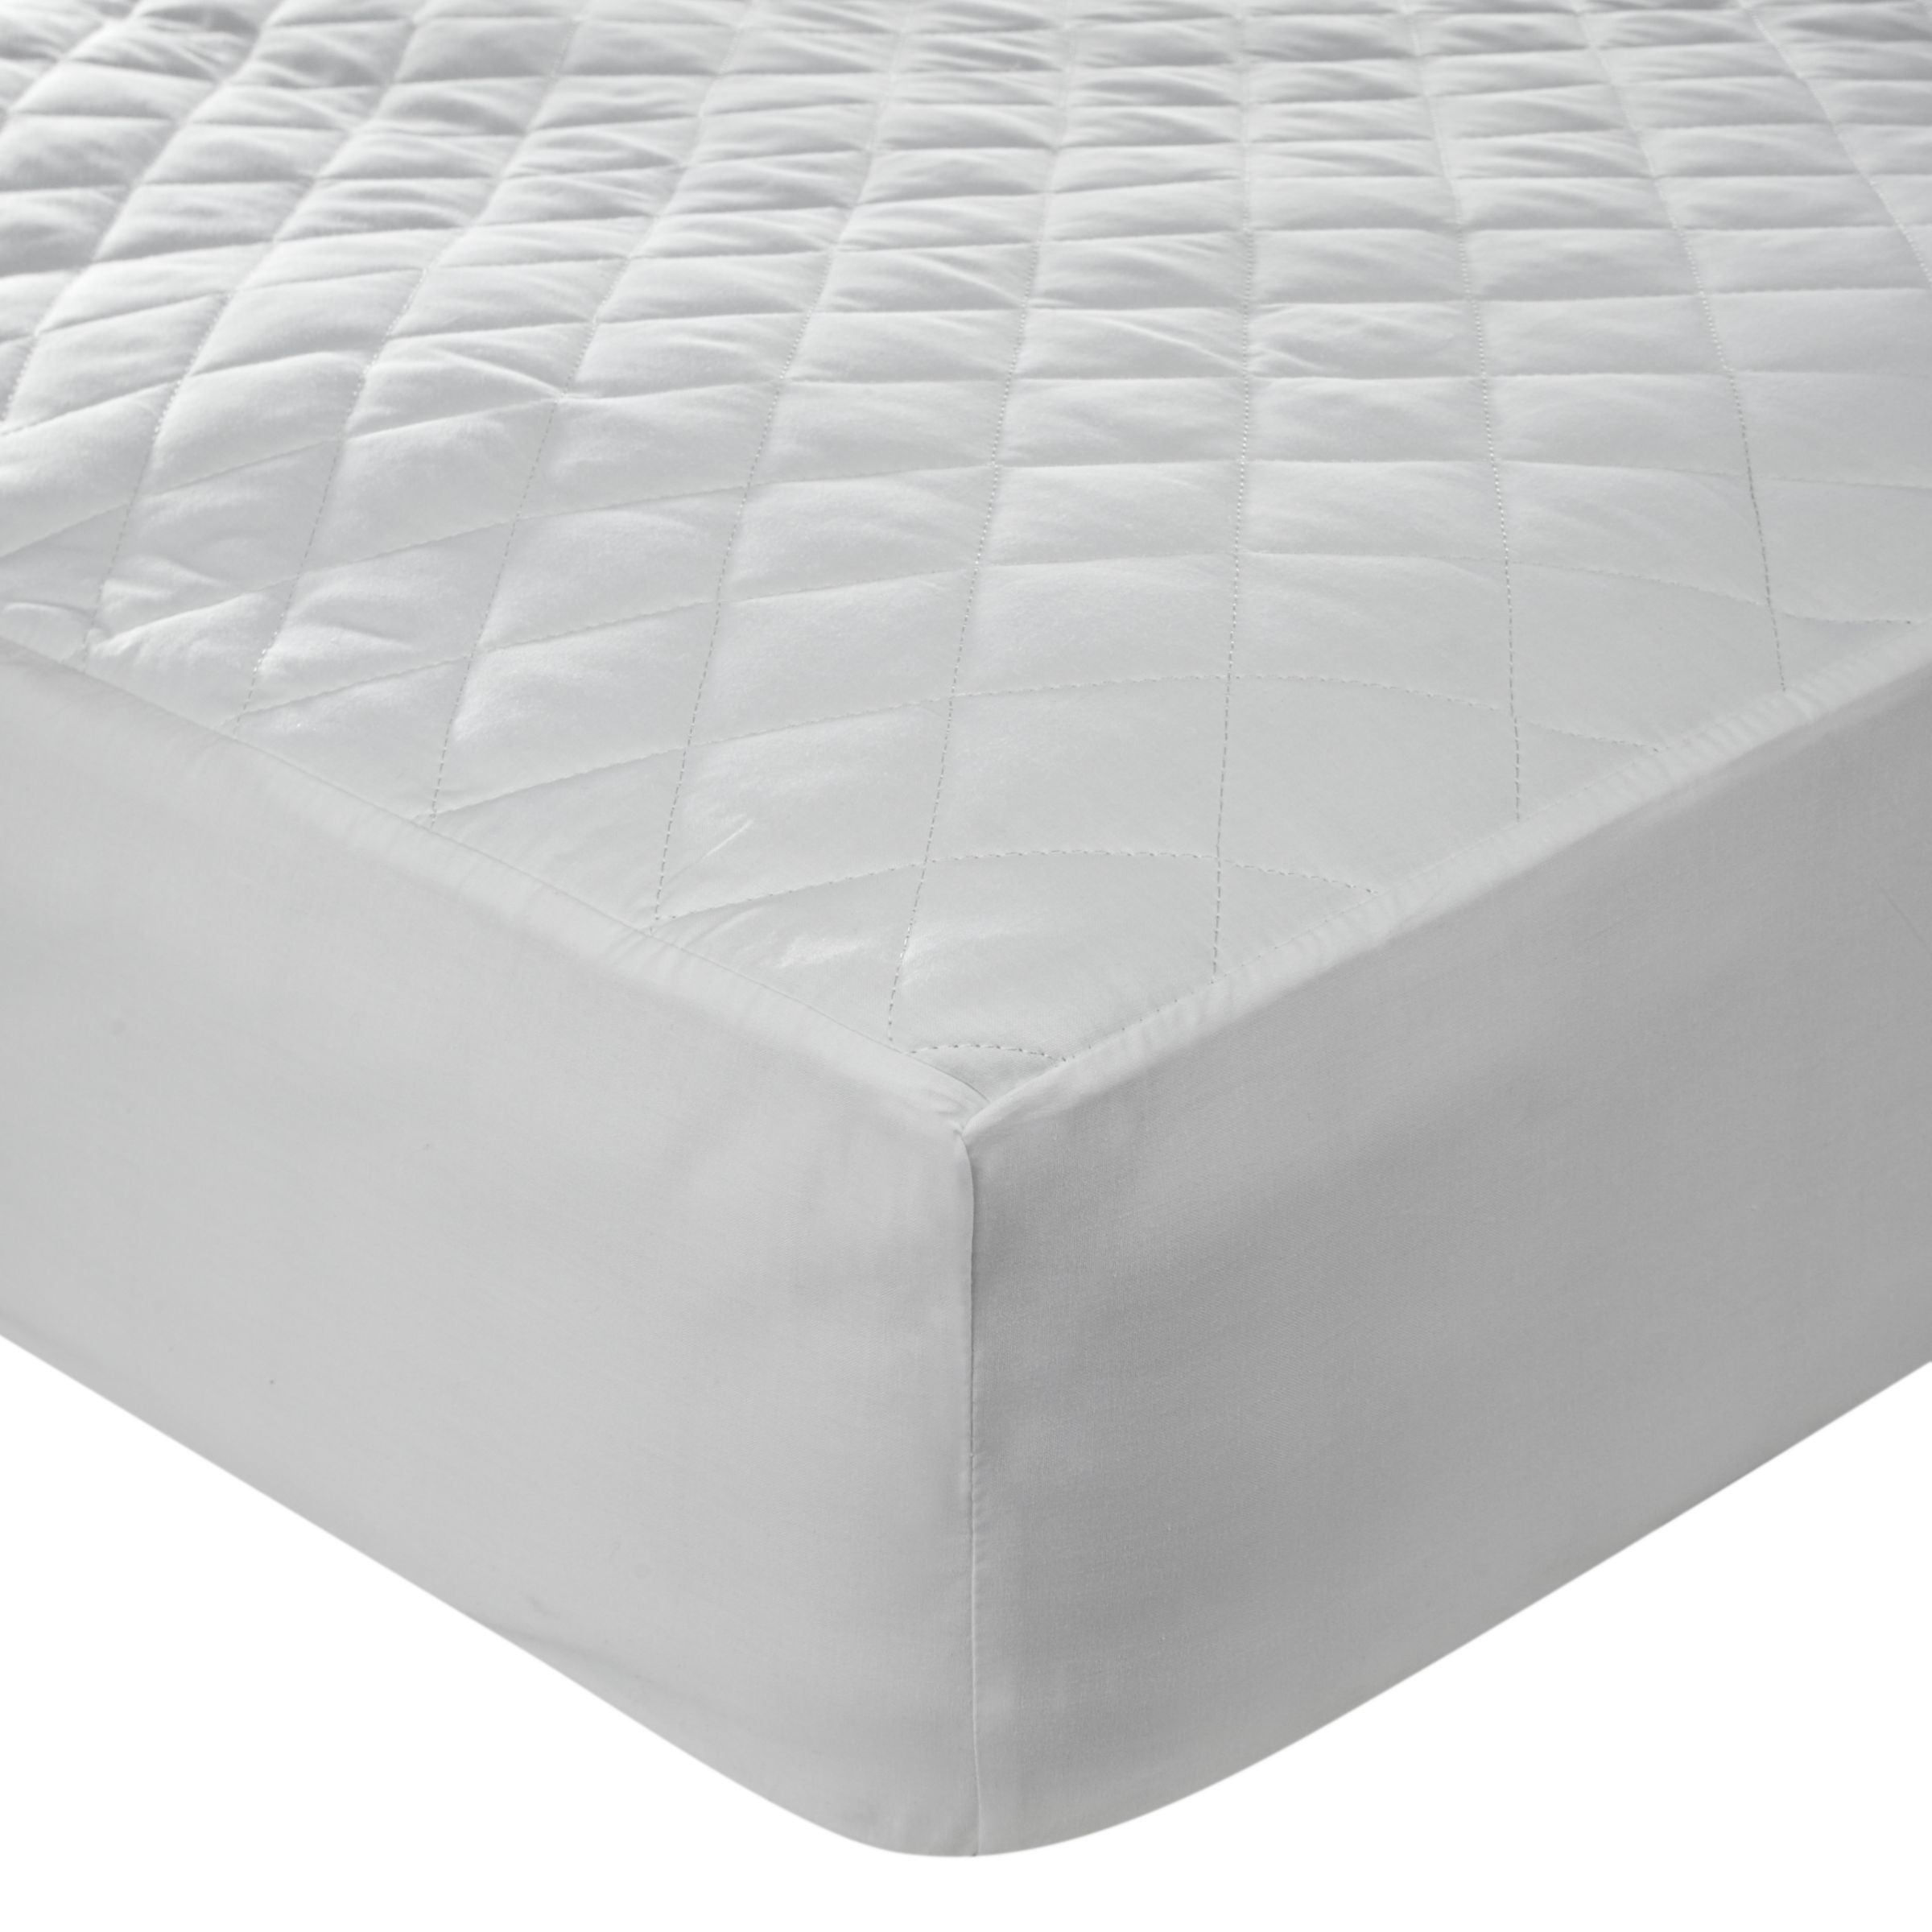 John Lewis Polycotton Quilted Mattress Protector, Small Single